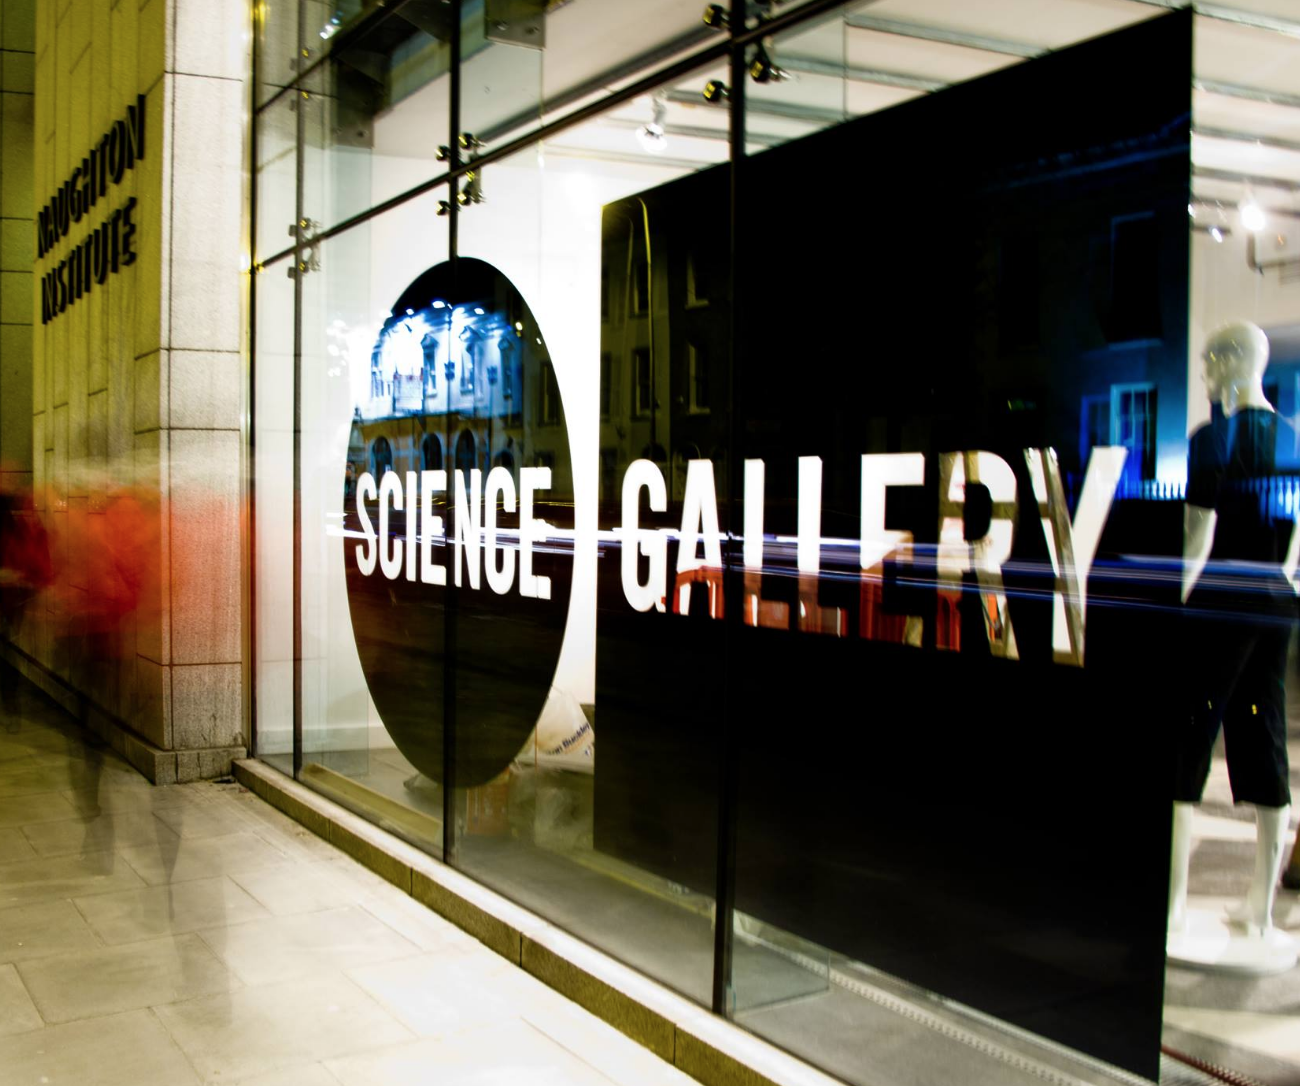 Science Gallery - YourDaysOut